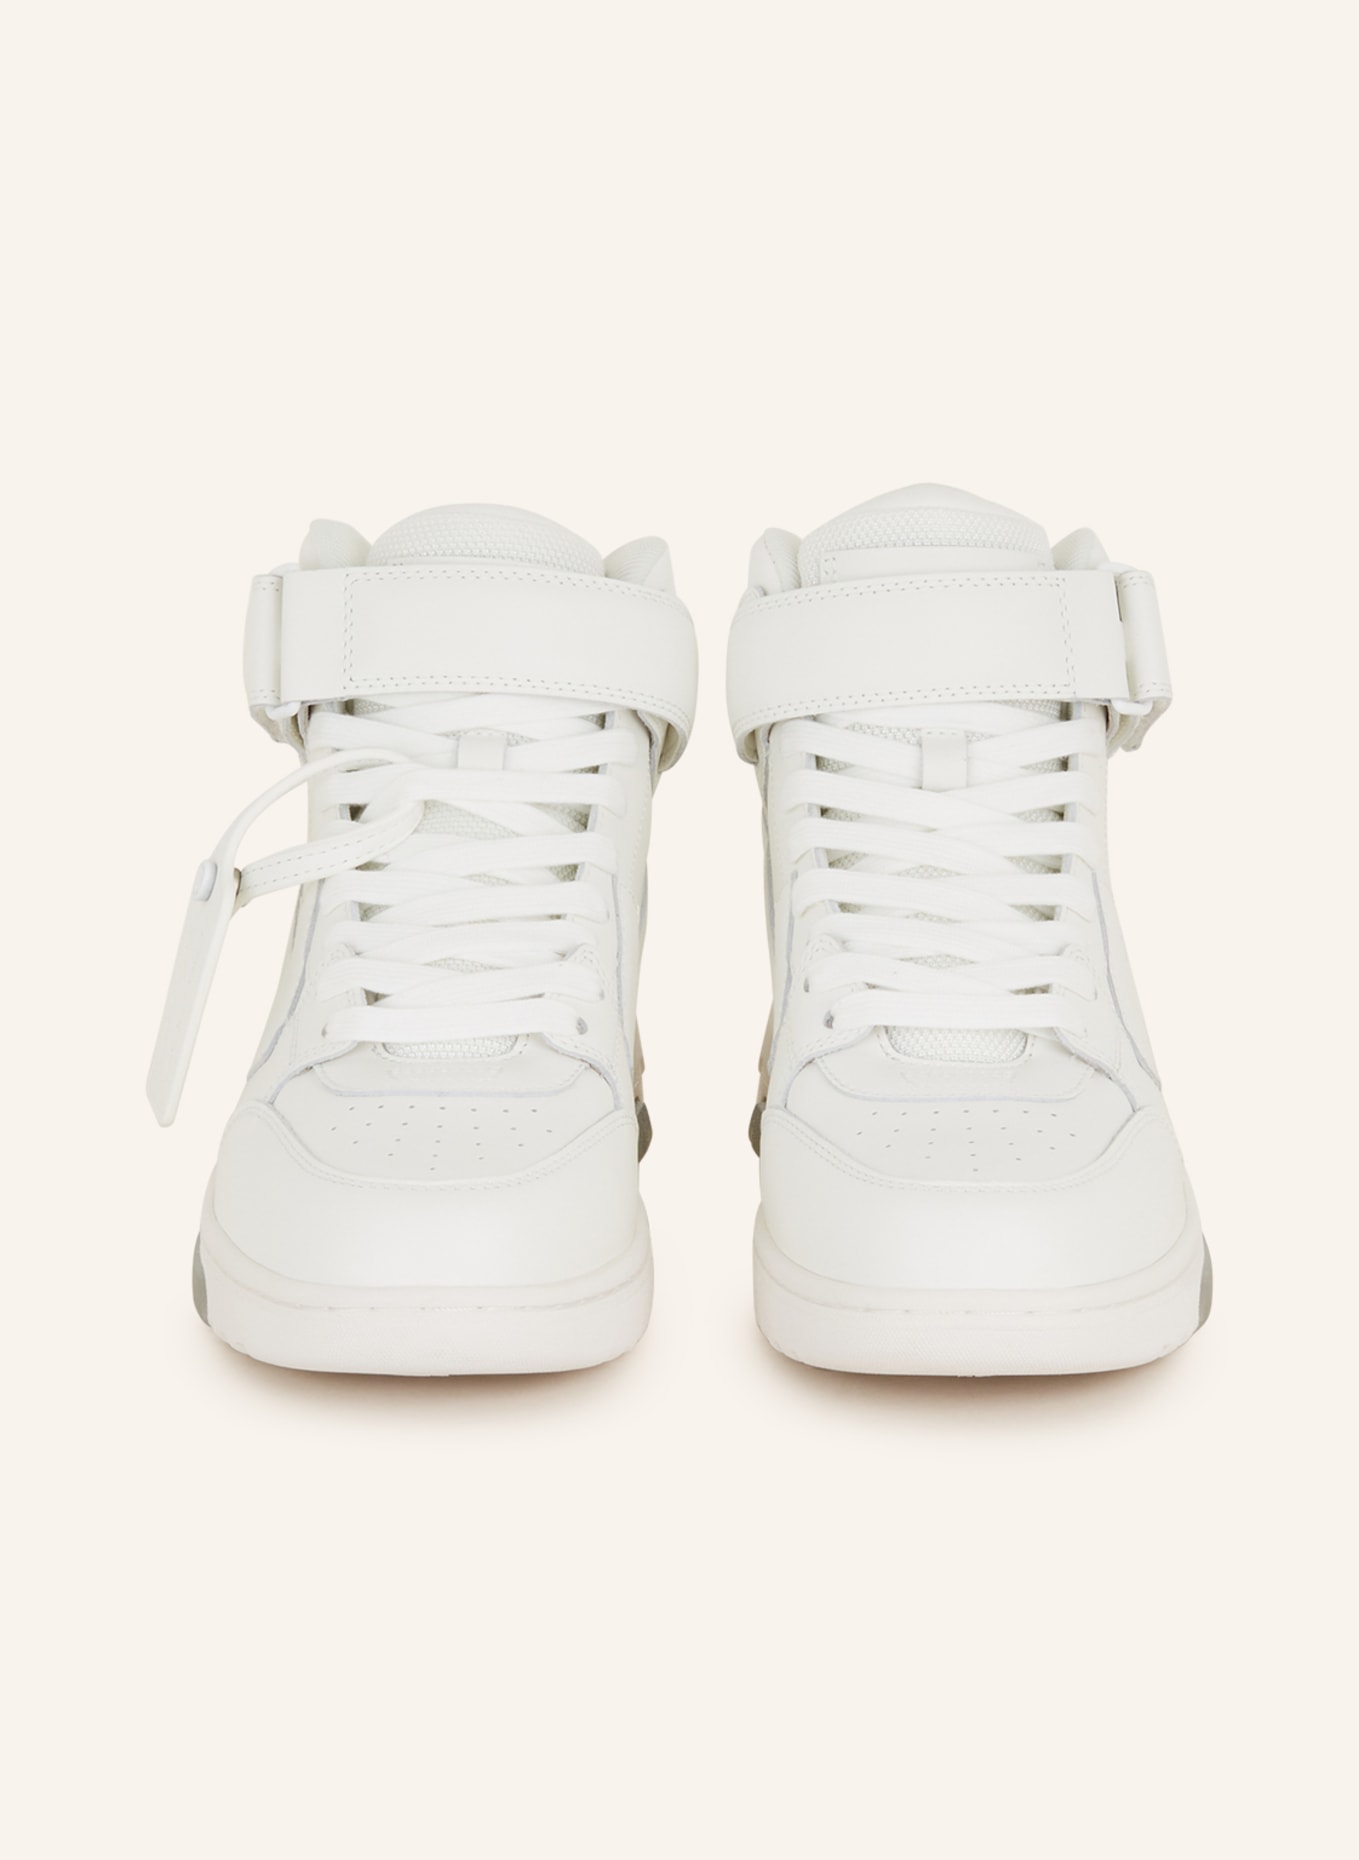 Off-White Hightop-Sneaker OUT OF OFFICE, Farbe: WEISS (Bild 3)